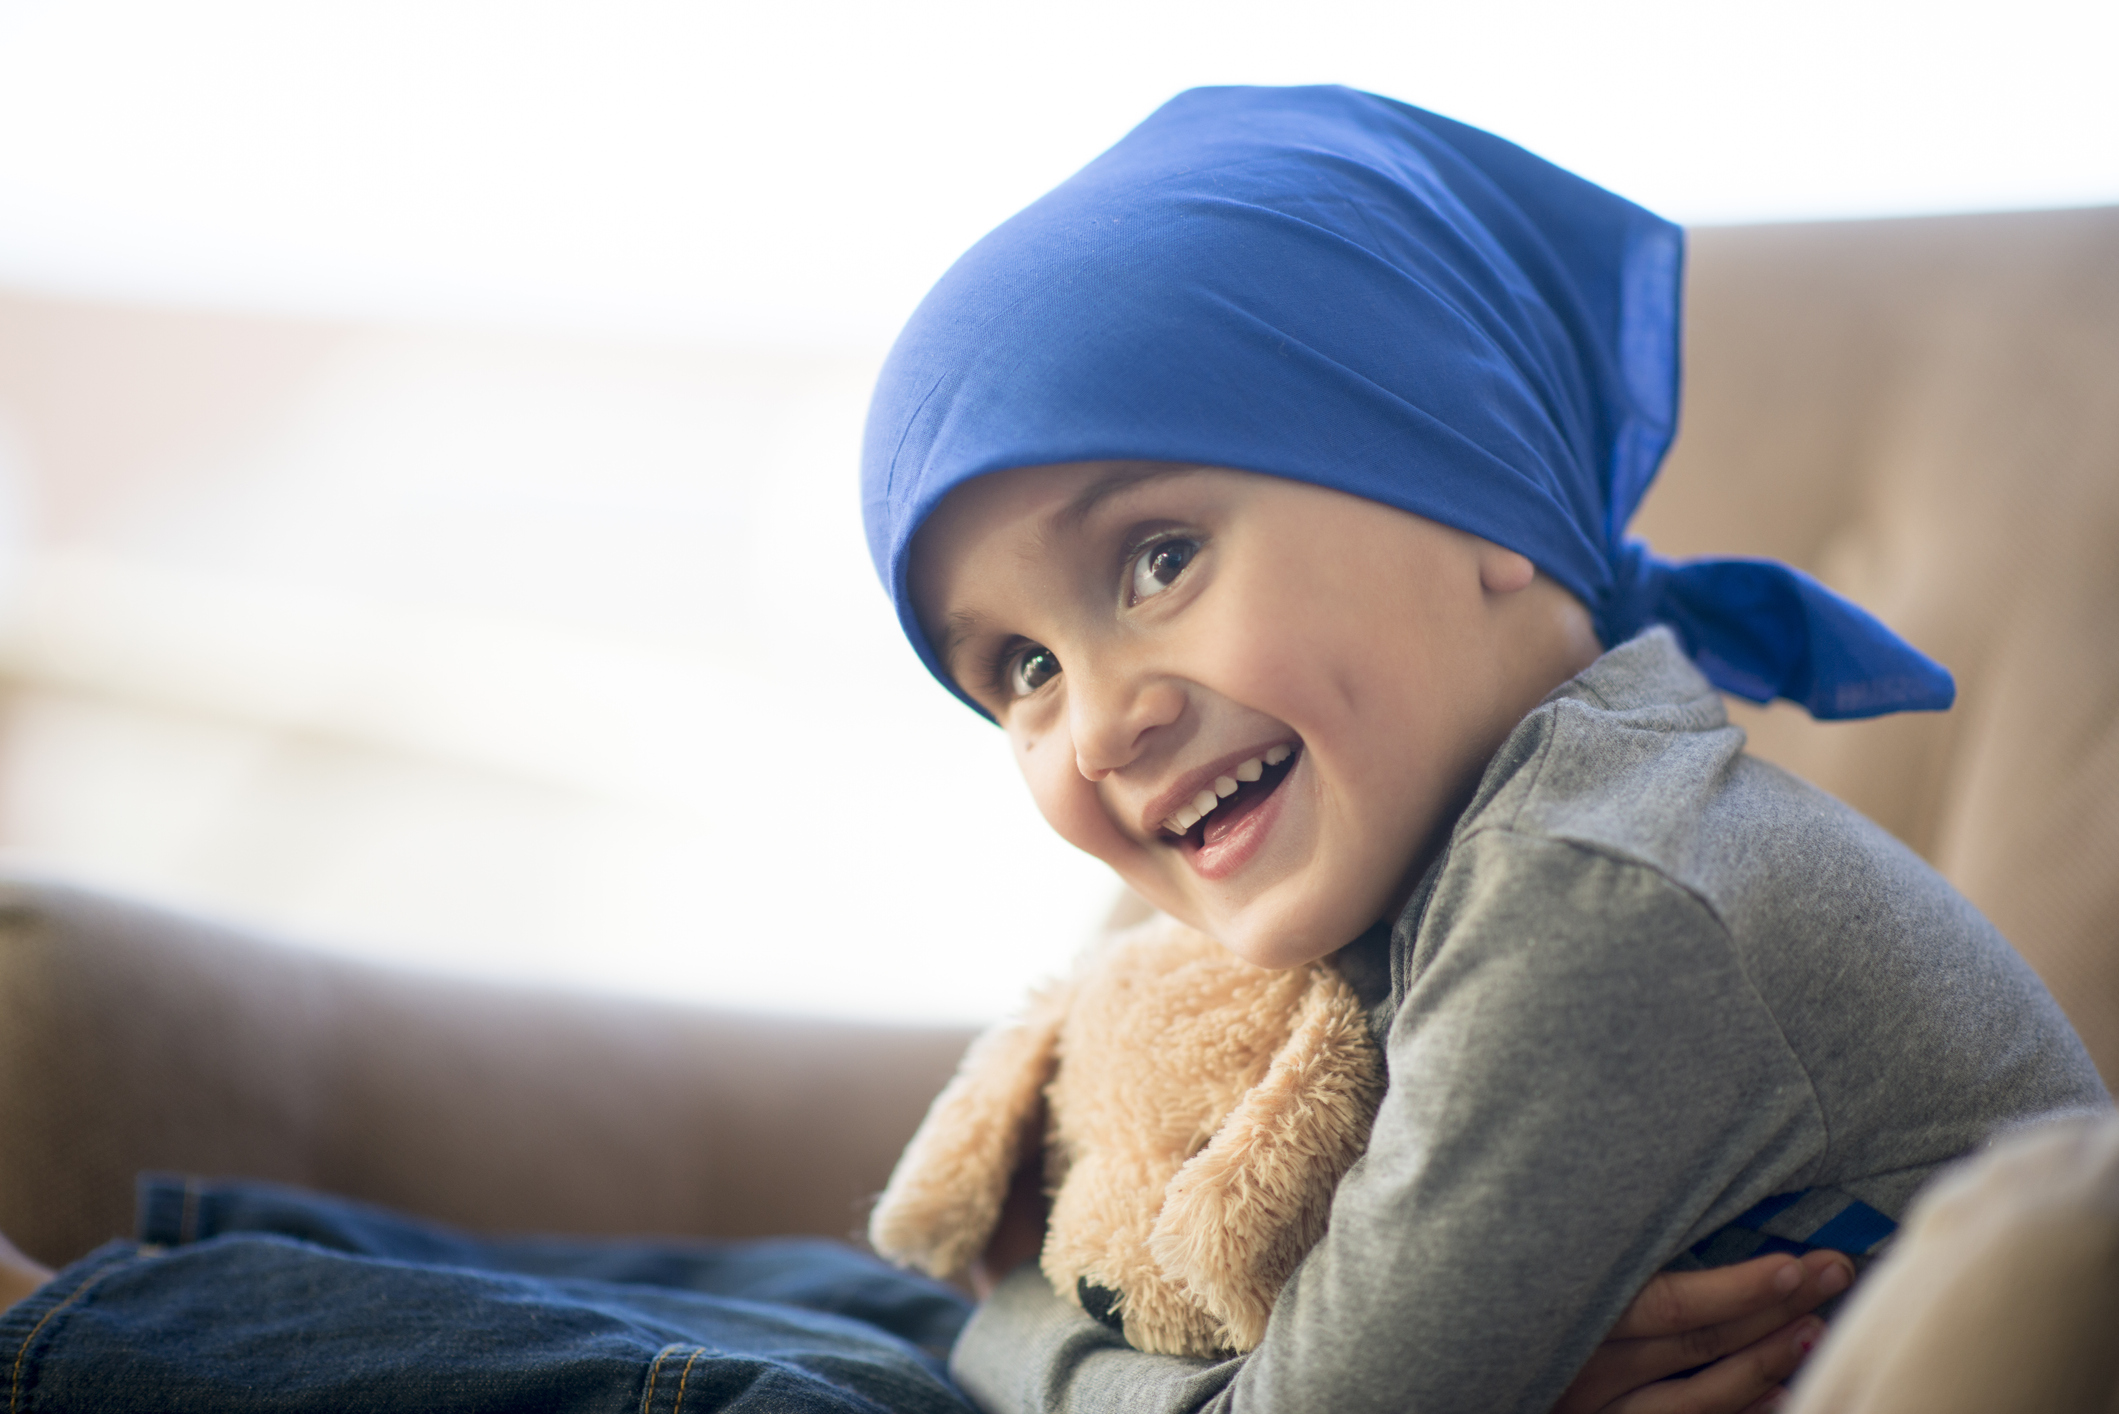 Our child care is equipped to support children with cancer.